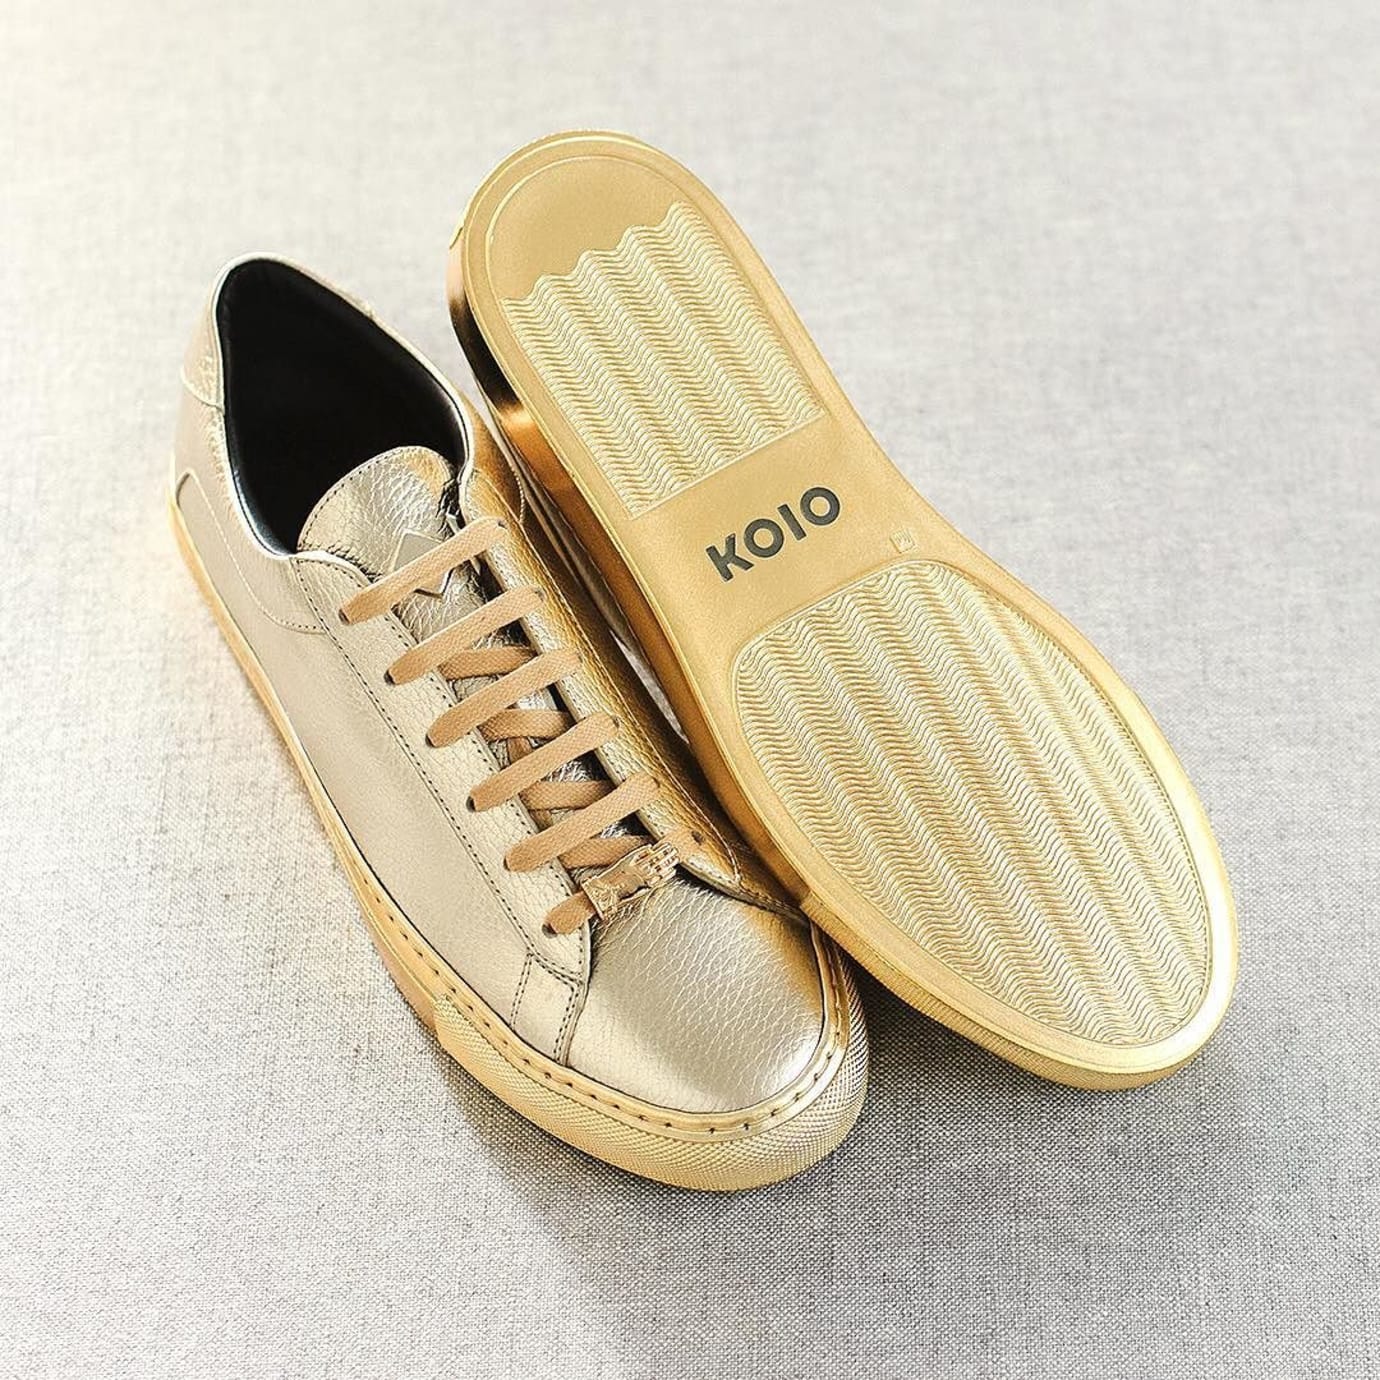 Koio Jamie Lannister Kingslayer Gold Sneakers Profile